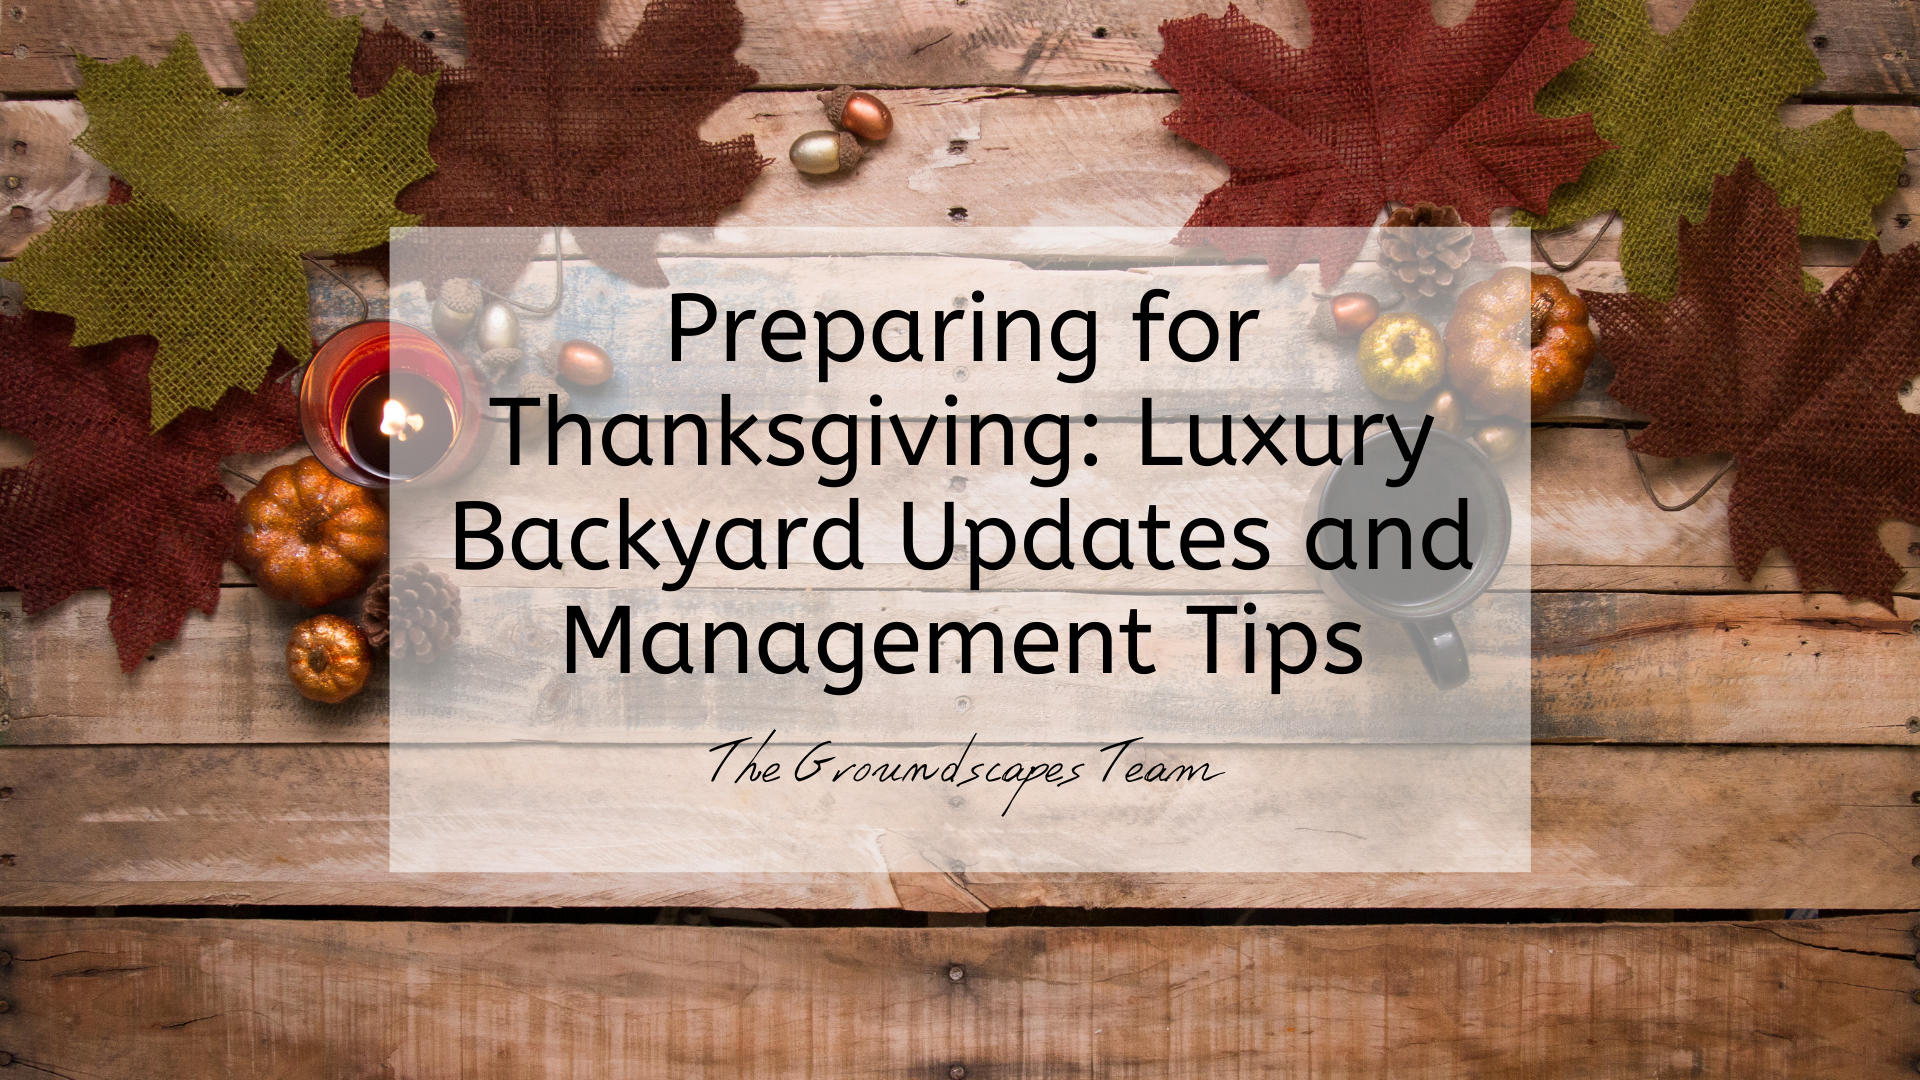 Preparing for Thanksgiving: Luxury Backyard Updates and Management Tips